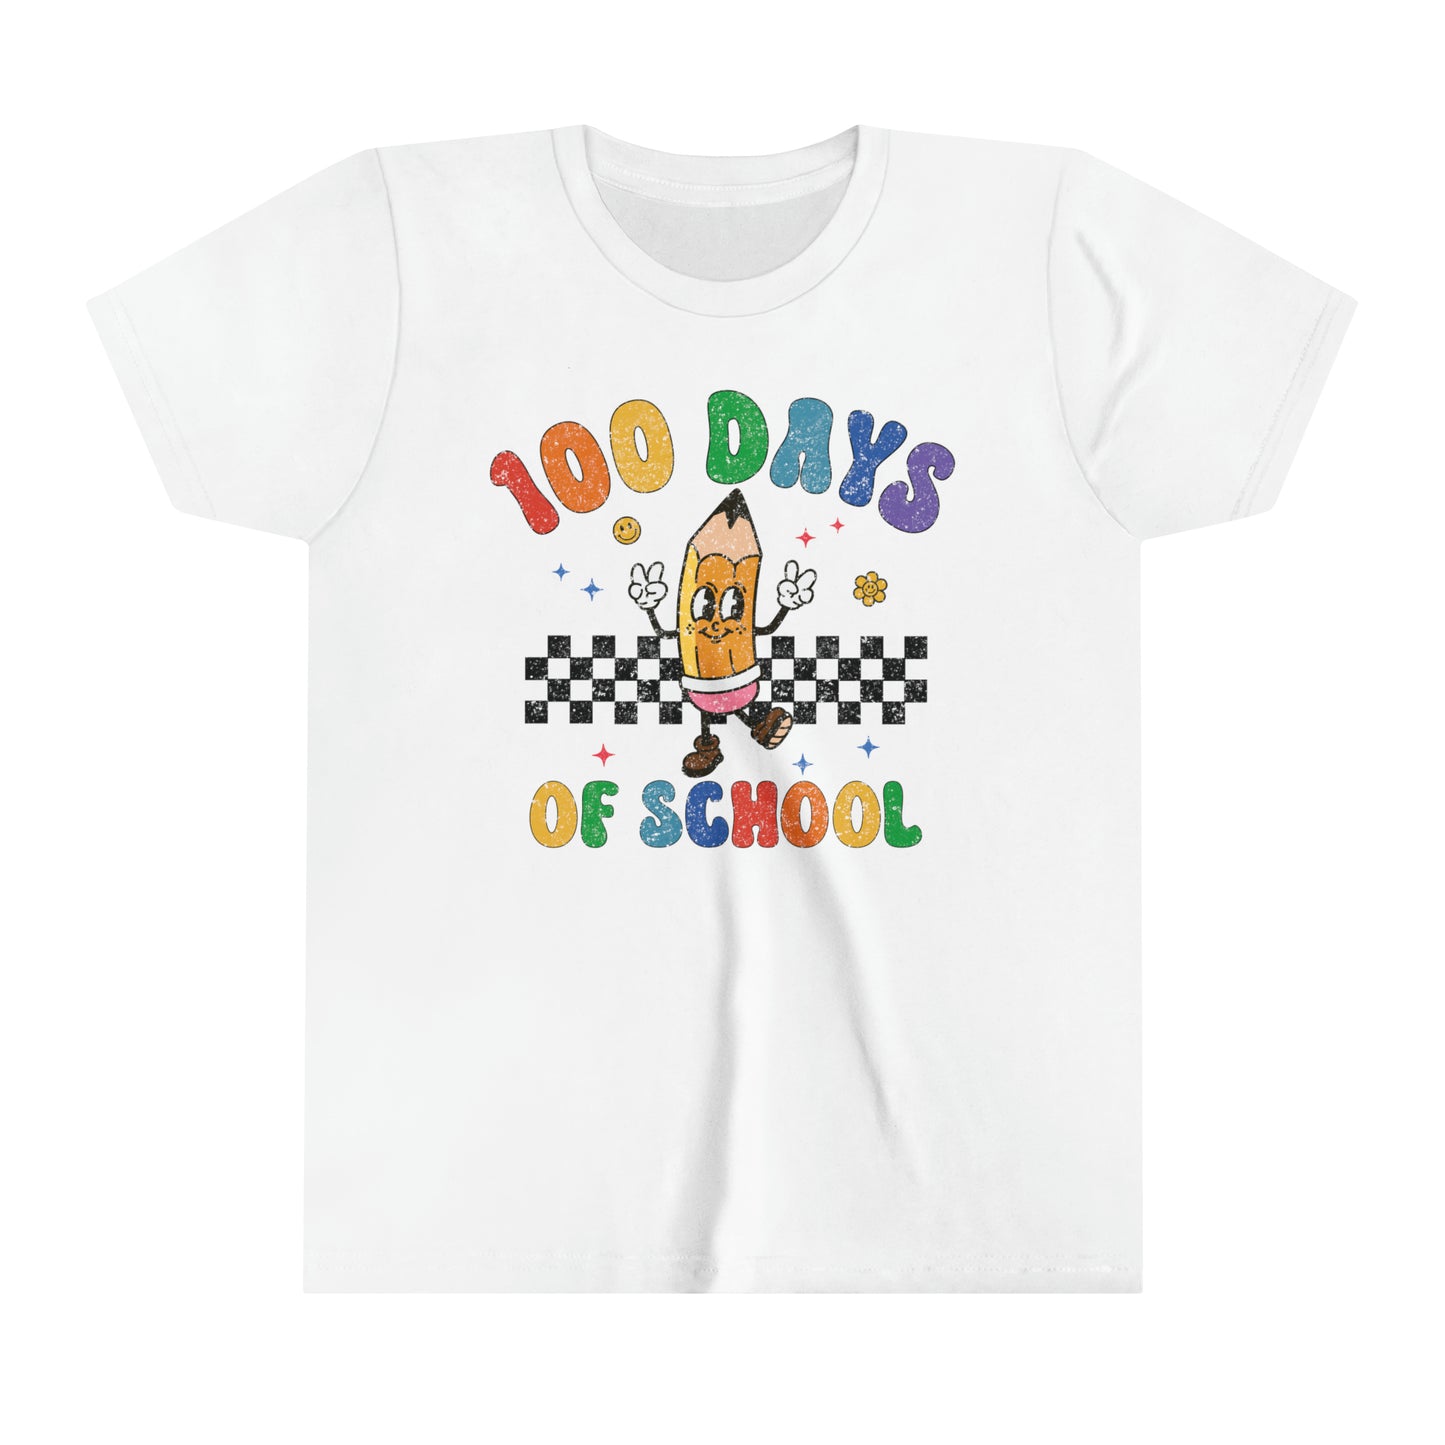 100 Days of School Youth Boy's and Girl's Unisex Short Sleeve Tee